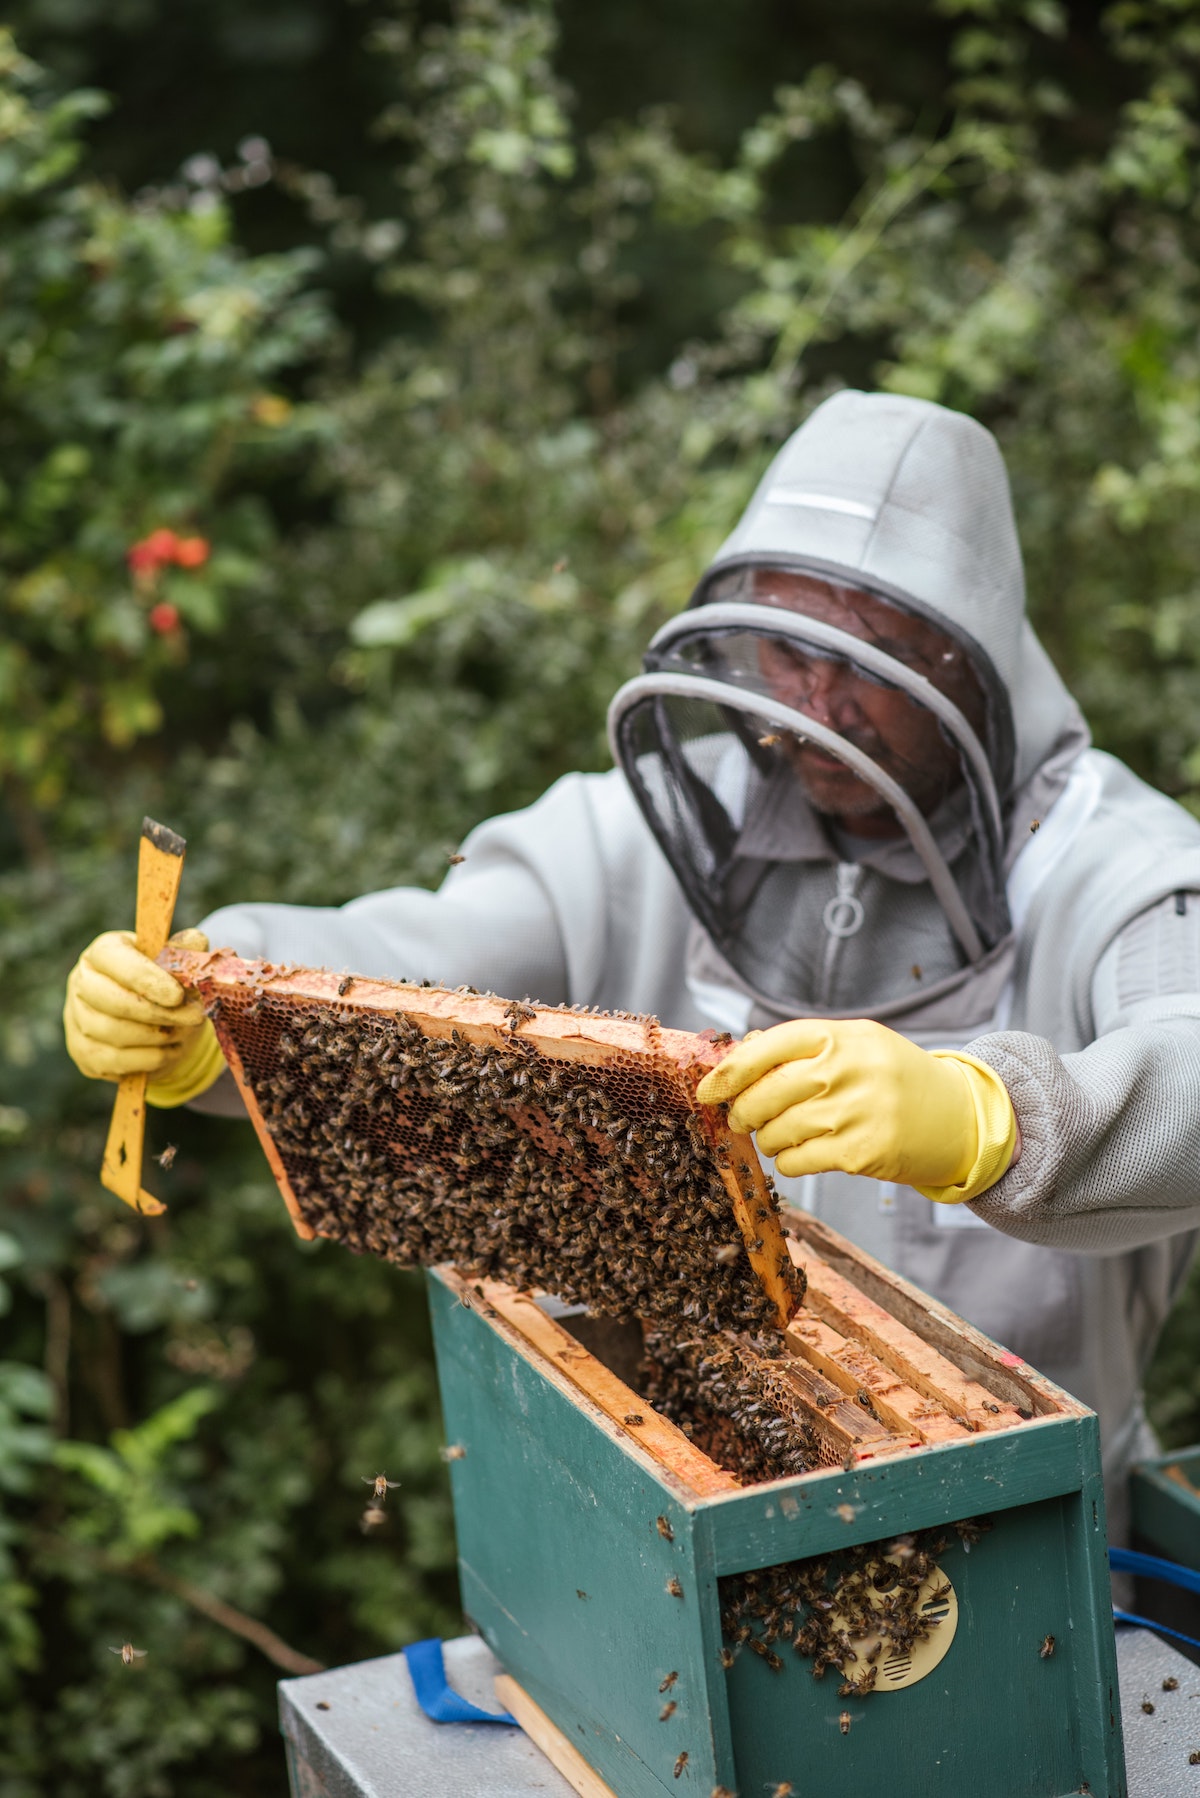 Honey harvest and what to consider - Honey harvest and what to consider